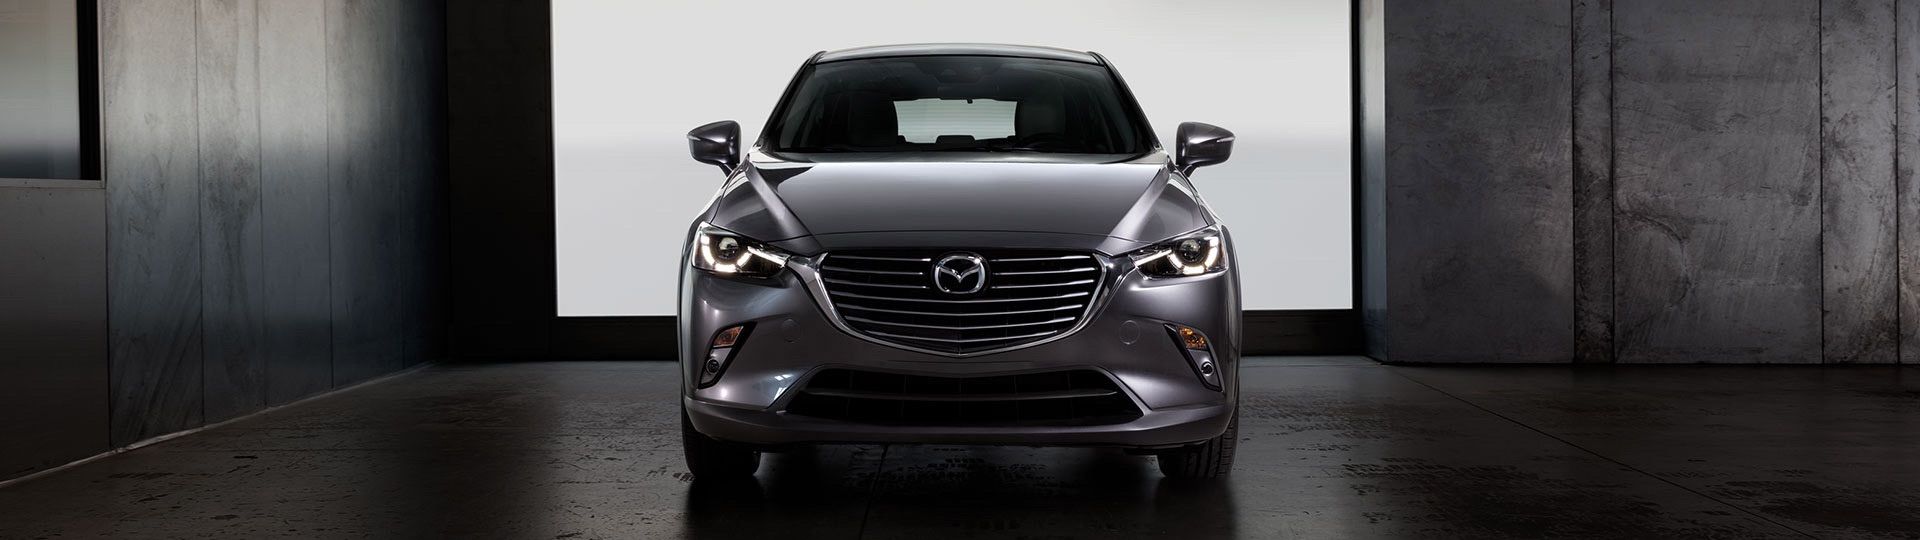 What's New With The 2019 Mazda CX-3? A Lot, Especially Under The Skin